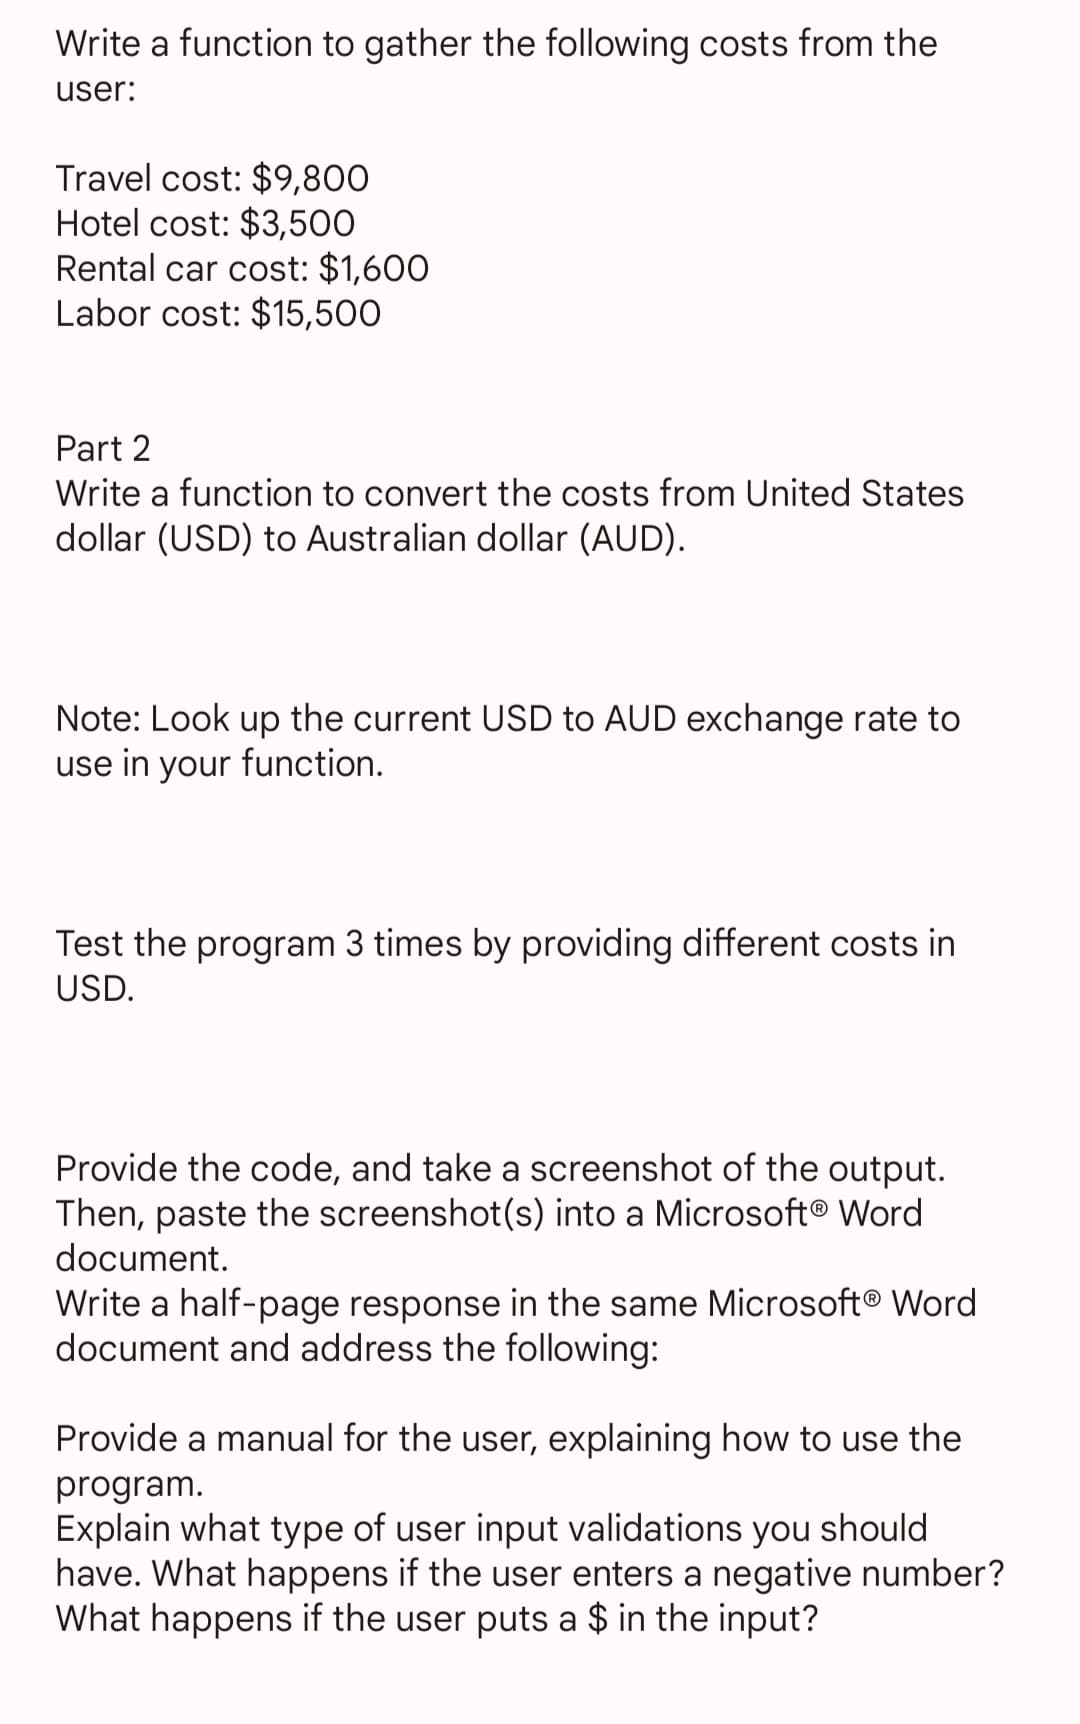 Write a function to gather the following costs from the
user:
Travel cost: $9,800
Hotel cost: $3,500
Rental car cost: $1,600
Labor cost: $15,500
Part 2
Write a function to convert the costs from United States
dollar (USD) to Australian dollar (AUD).
Note: Look up the current USD to AUD exchange rate to
use in your function.
Test the program 3 times by providing different costs in
USD.
Provide the code, and take a screenshot of the output.
Then, paste the screenshot(s) into a Microsoft® Word
document.
Write a half-page response in the same Microsoft® Word
document and address the following:
Provide a manual for the user, explaining how to use the
program.
Explain what type of user input validations you should
have. What happens if the user enters a negative number?
What happens if the user puts a $ in the input?